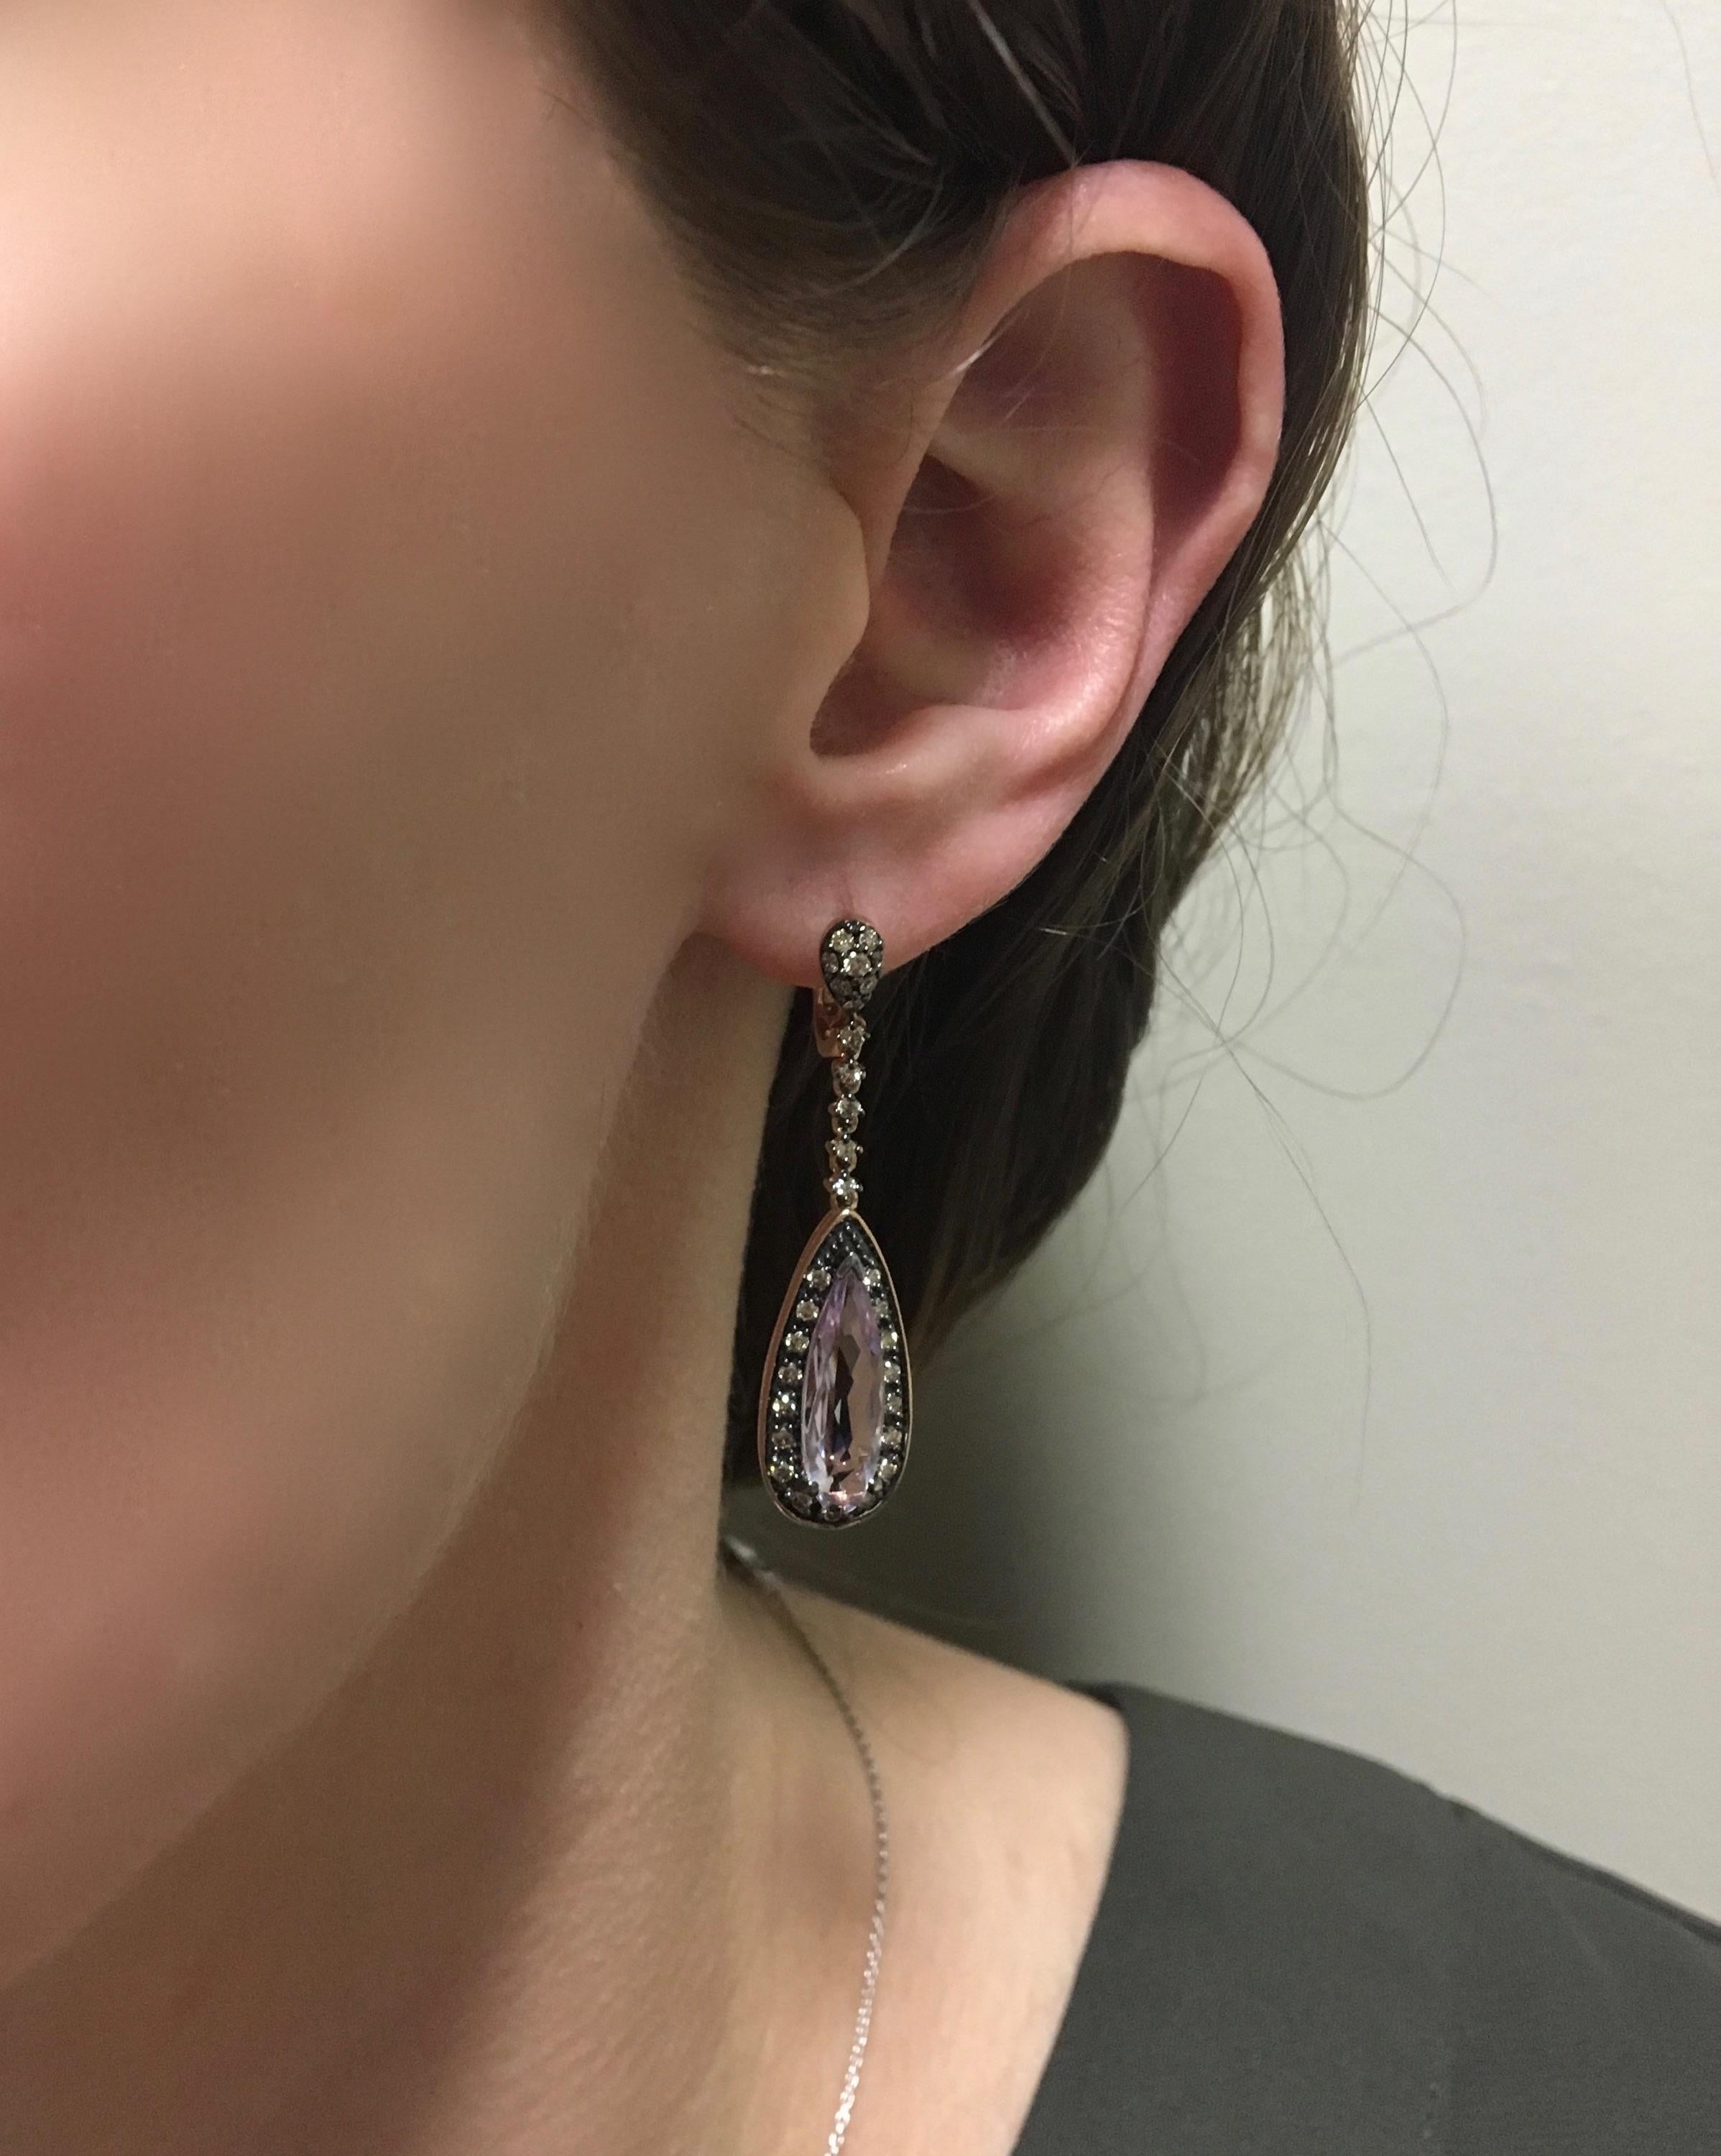 Beautiful Le Vian Amethyst Earrings Adorned with Chocolate Colored Diamonds

Designer: Le Vian
Gemstone: Two Elongated Pear Shaped Amethysts
Gemstone Size: Approximately 15.5 x 6mm 
Diamond Carat Weight: Approximately .60CTW
Diamond Cut: 60 Round